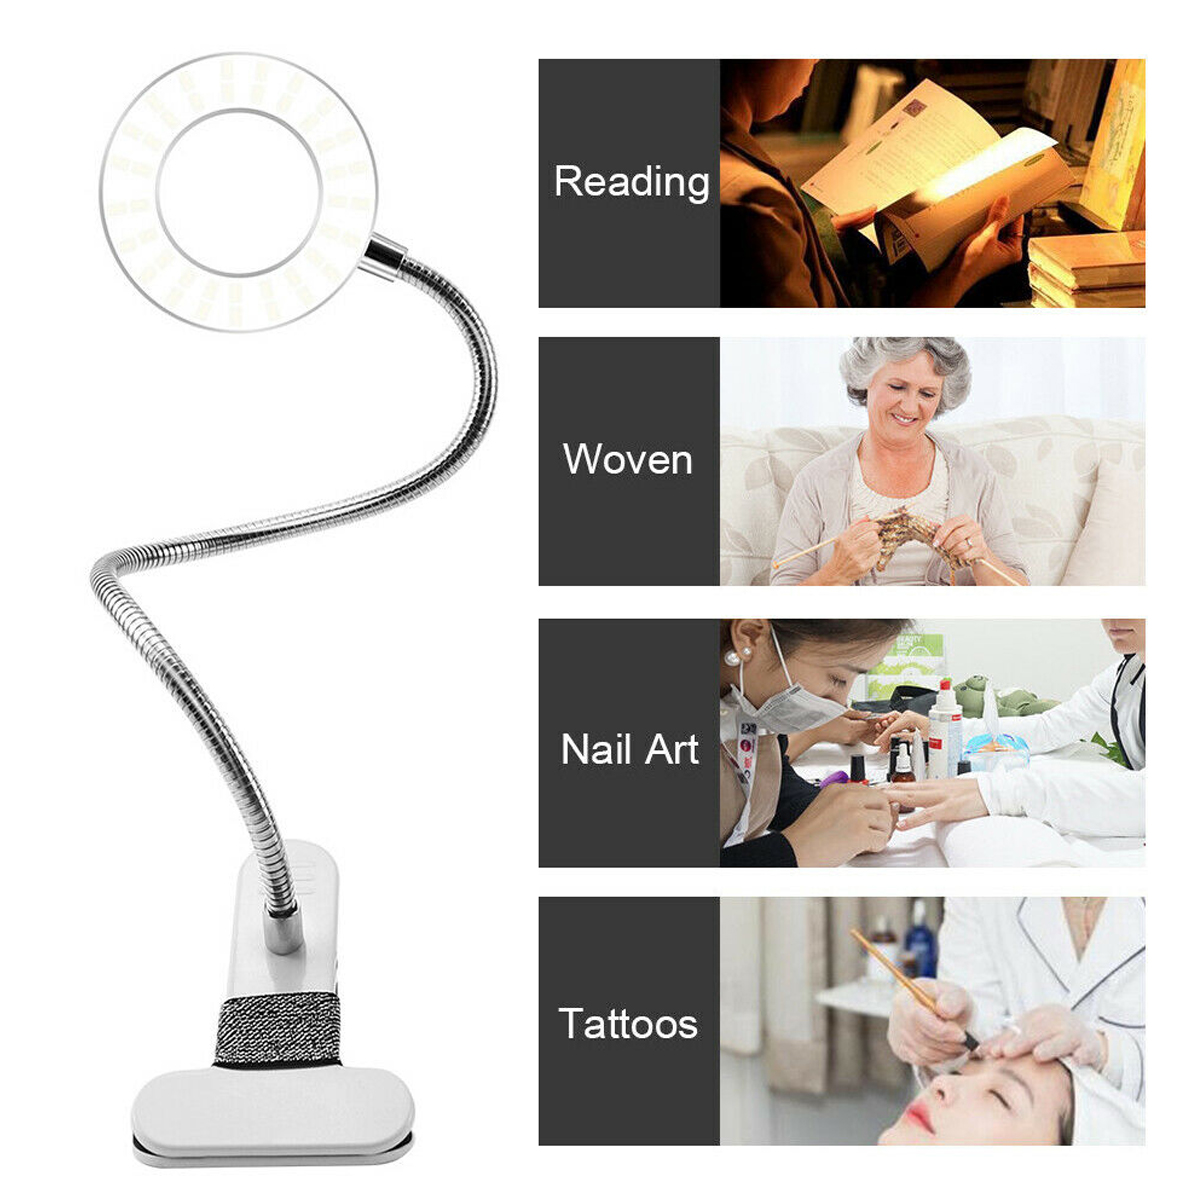 10W-X8-Magnifying-Lamp-Desk-Table-Top-Glass-Beauty-Nail-Salon-Tattoo-Magnifier-Light-1763706-8